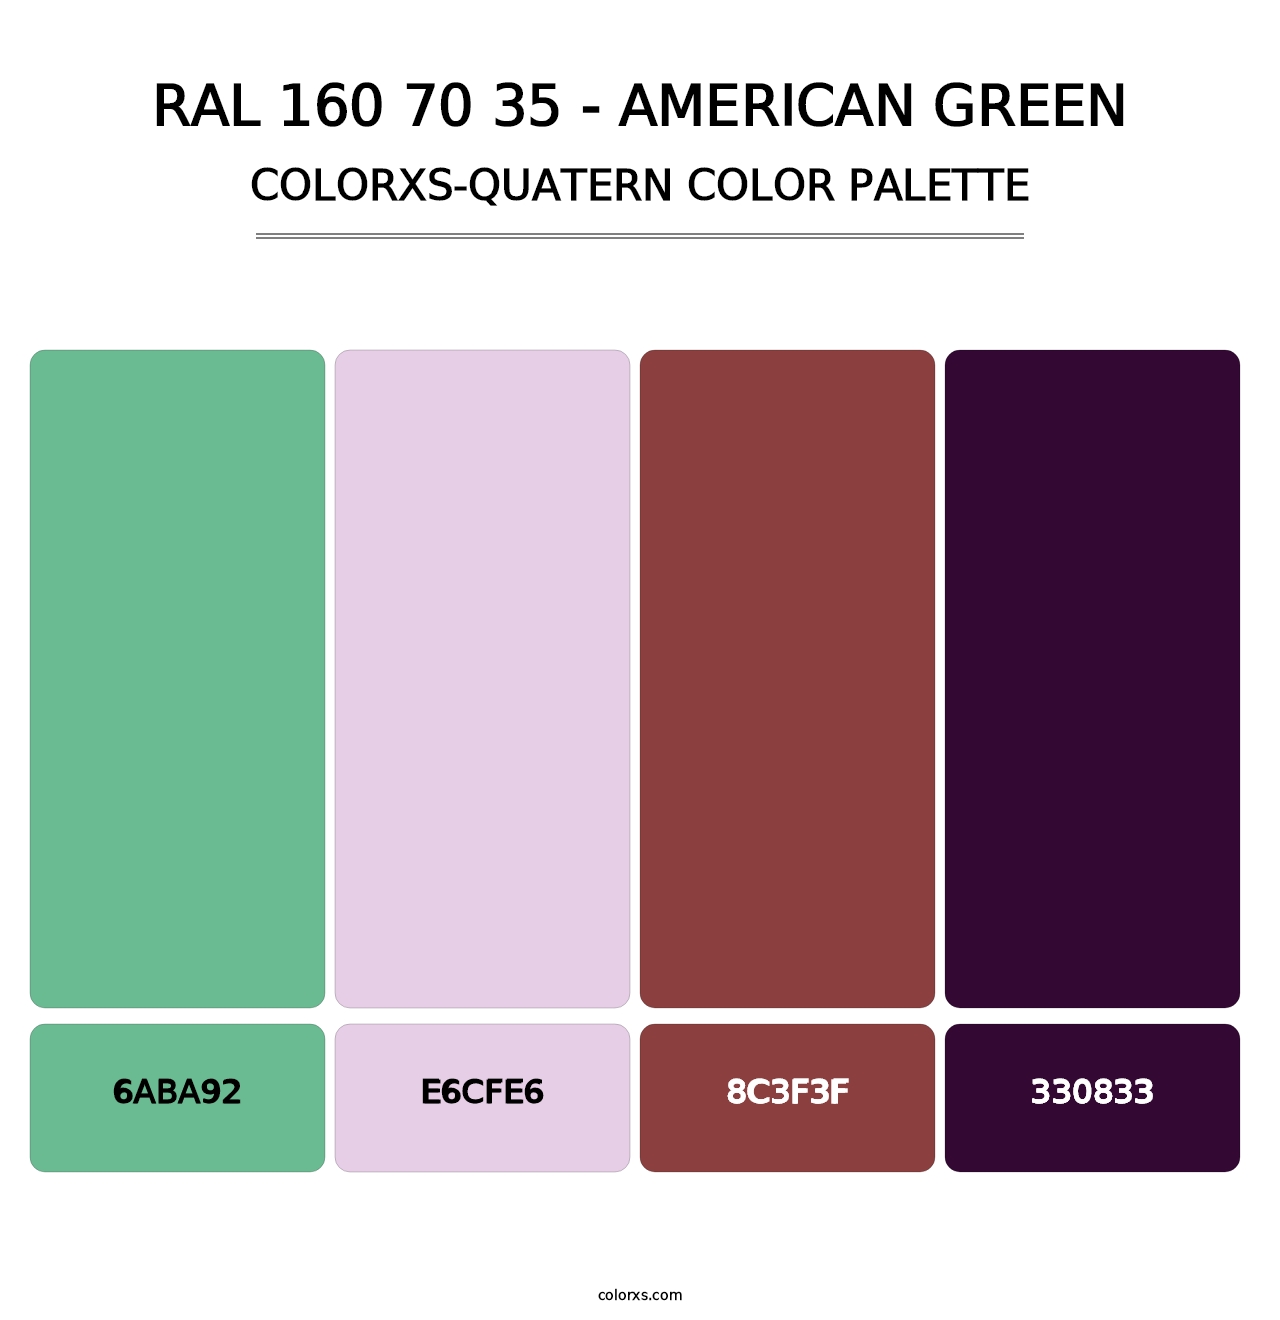 RAL 160 70 35 - American Green - Colorxs Quatern Palette